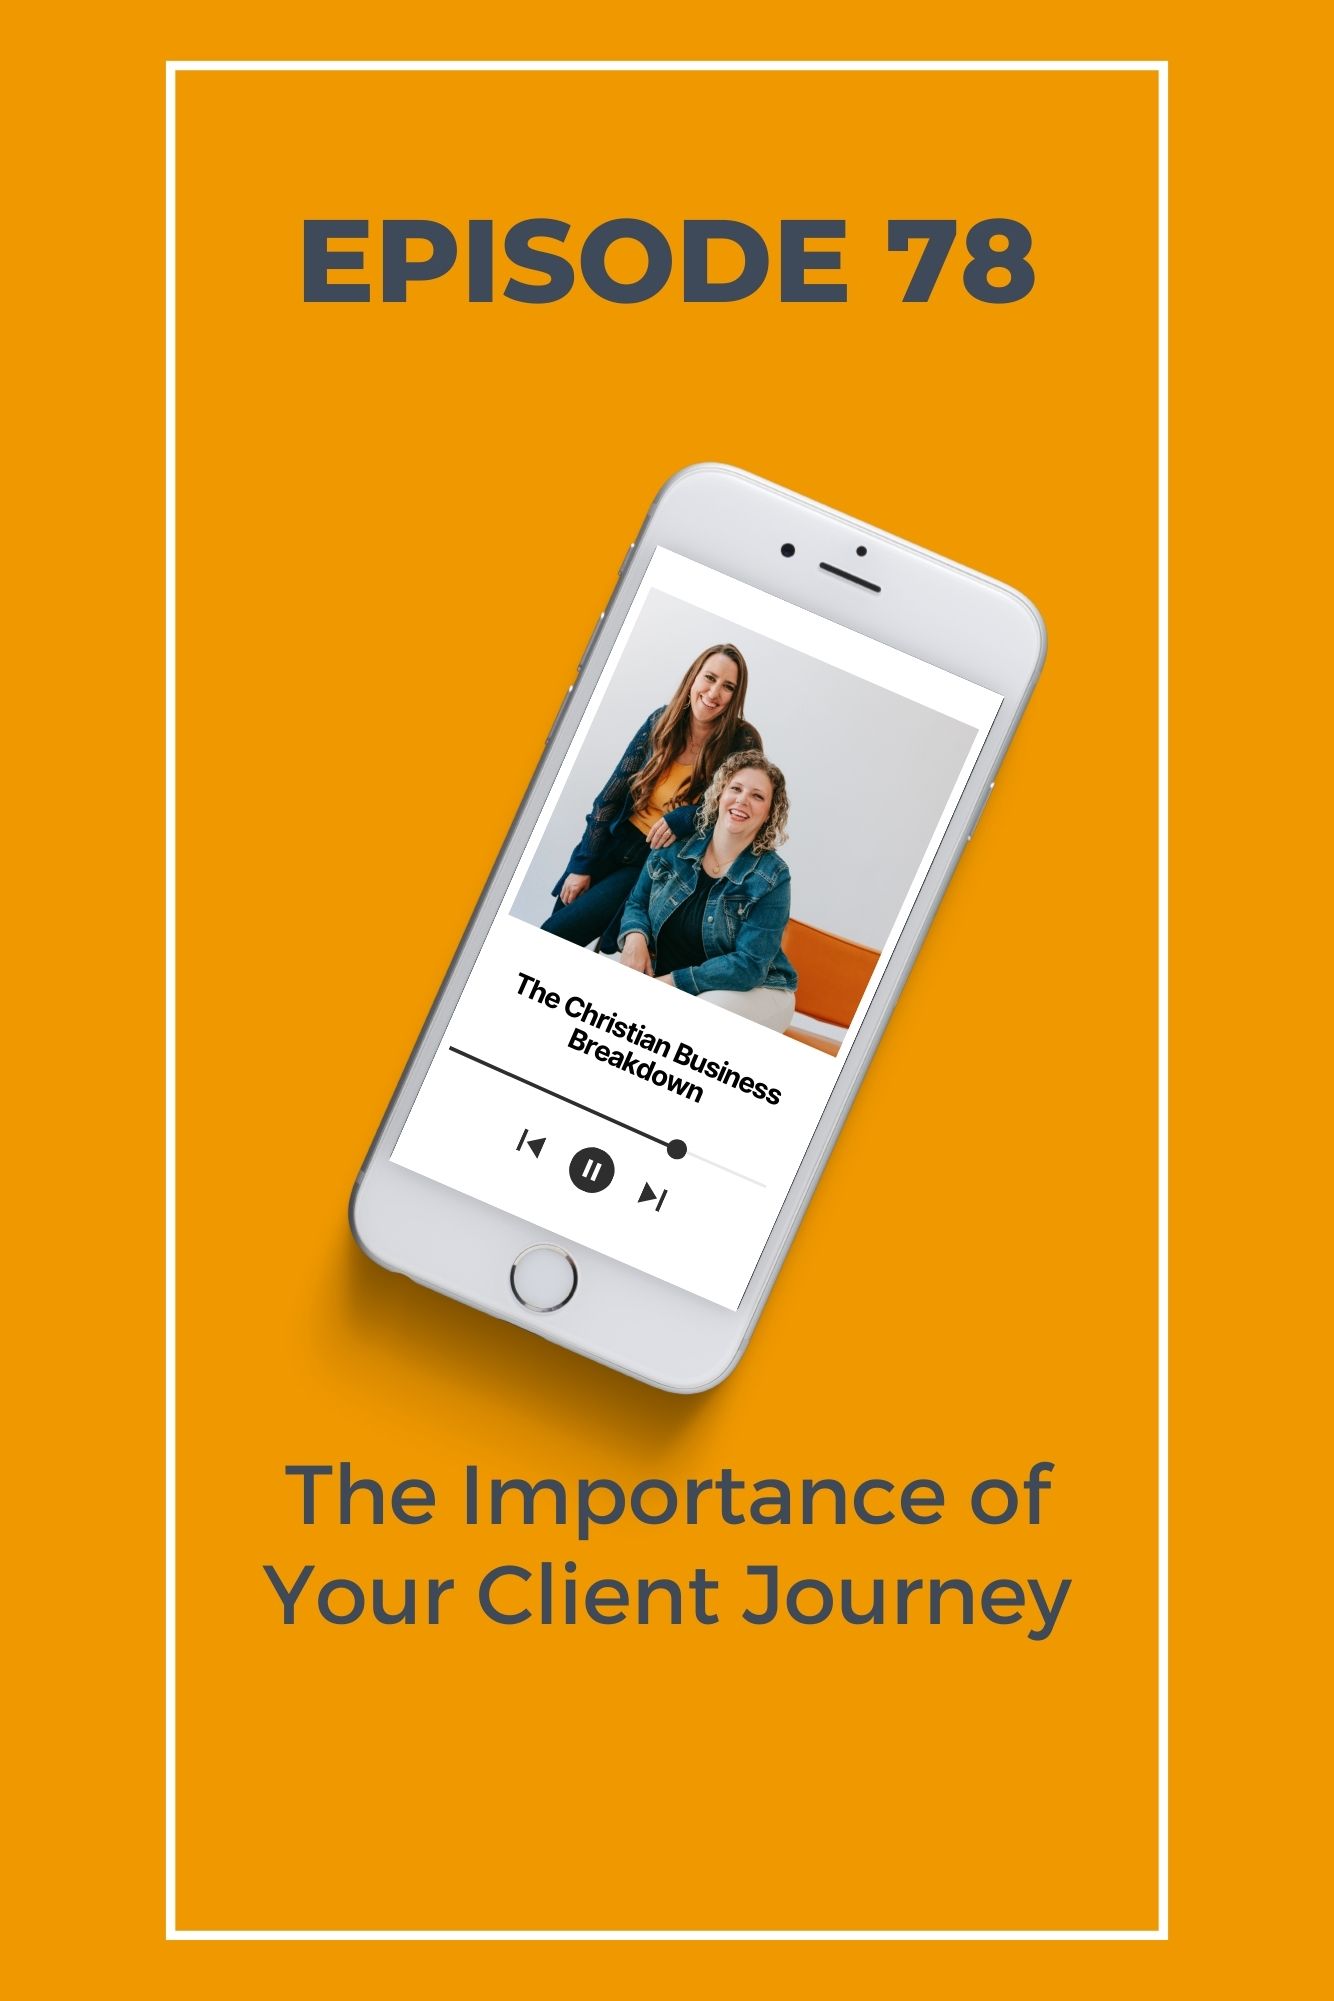 A graphic of a phone with two women Christian business owners who have a podcast about the importance of your client journey.